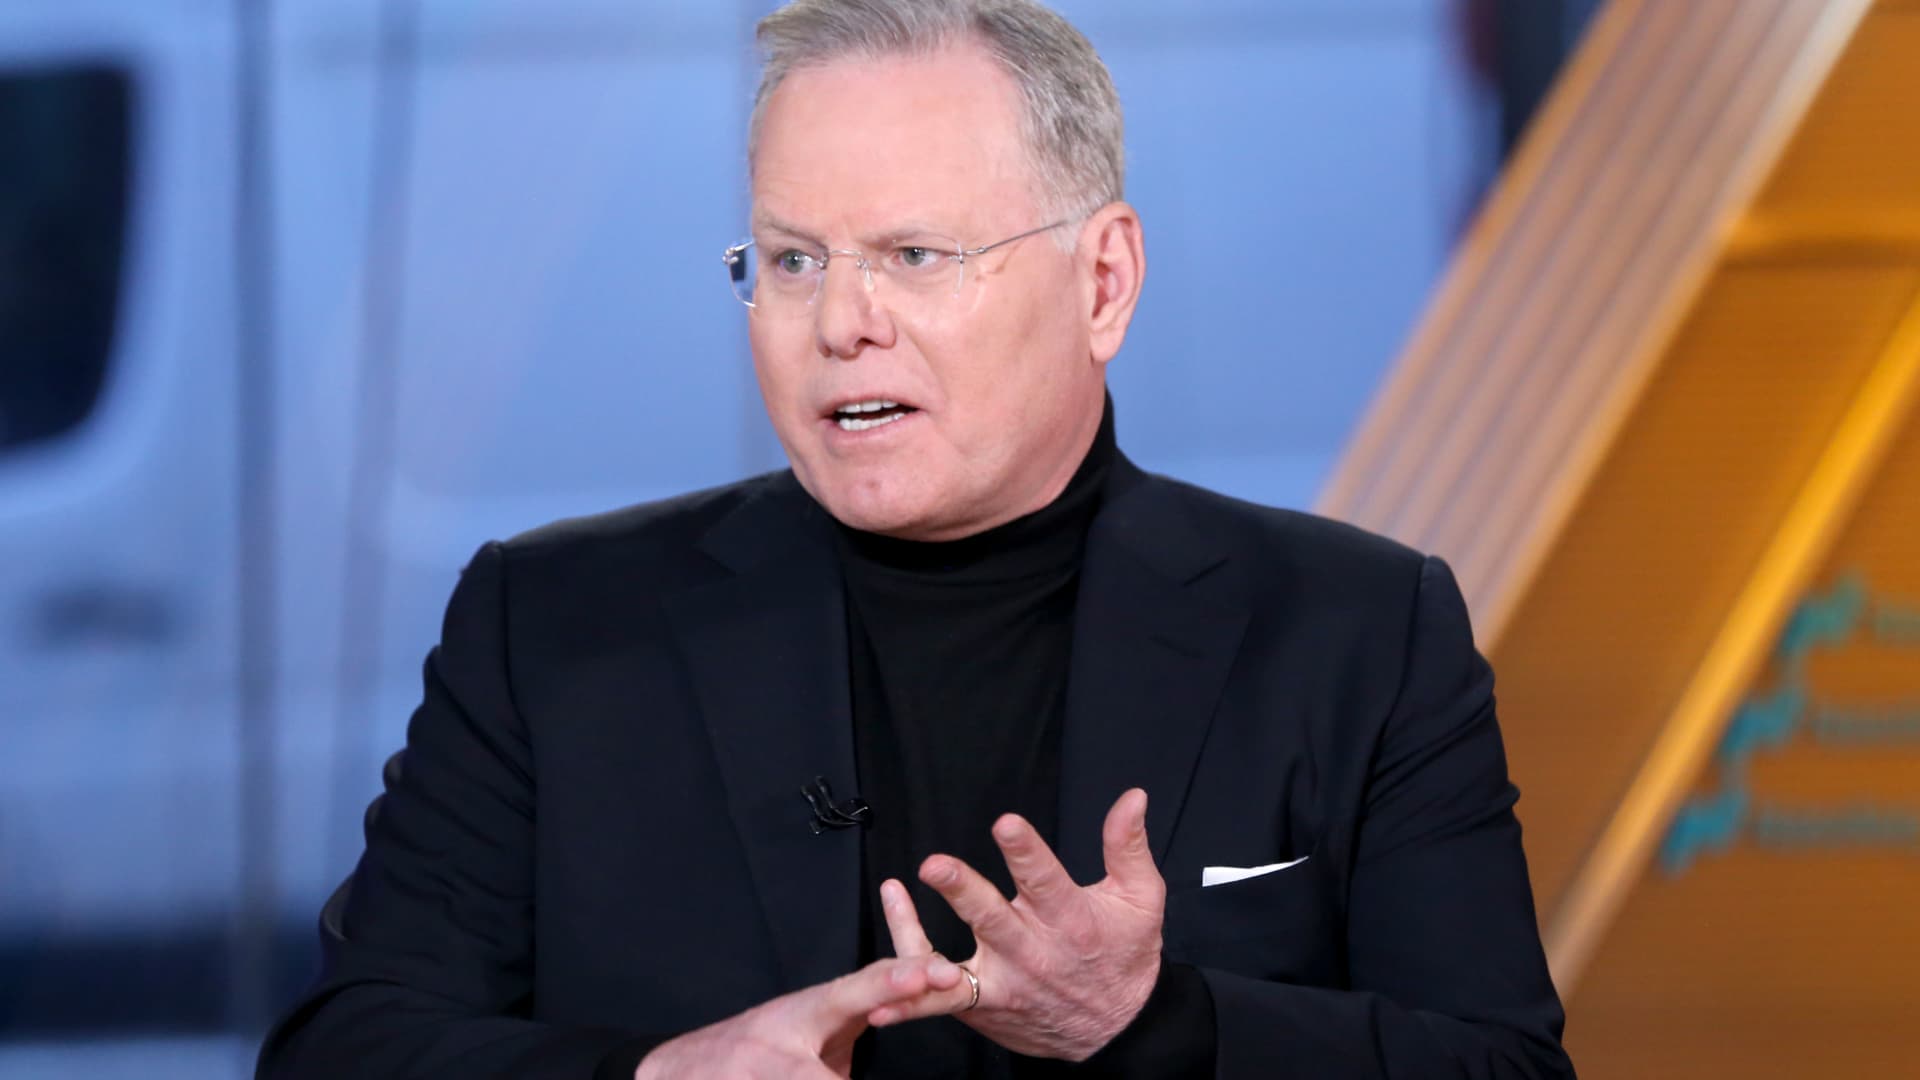 Advert market worse than throughout lows of the pandemic, says Warner Bros Discovery CEO David Zaslav